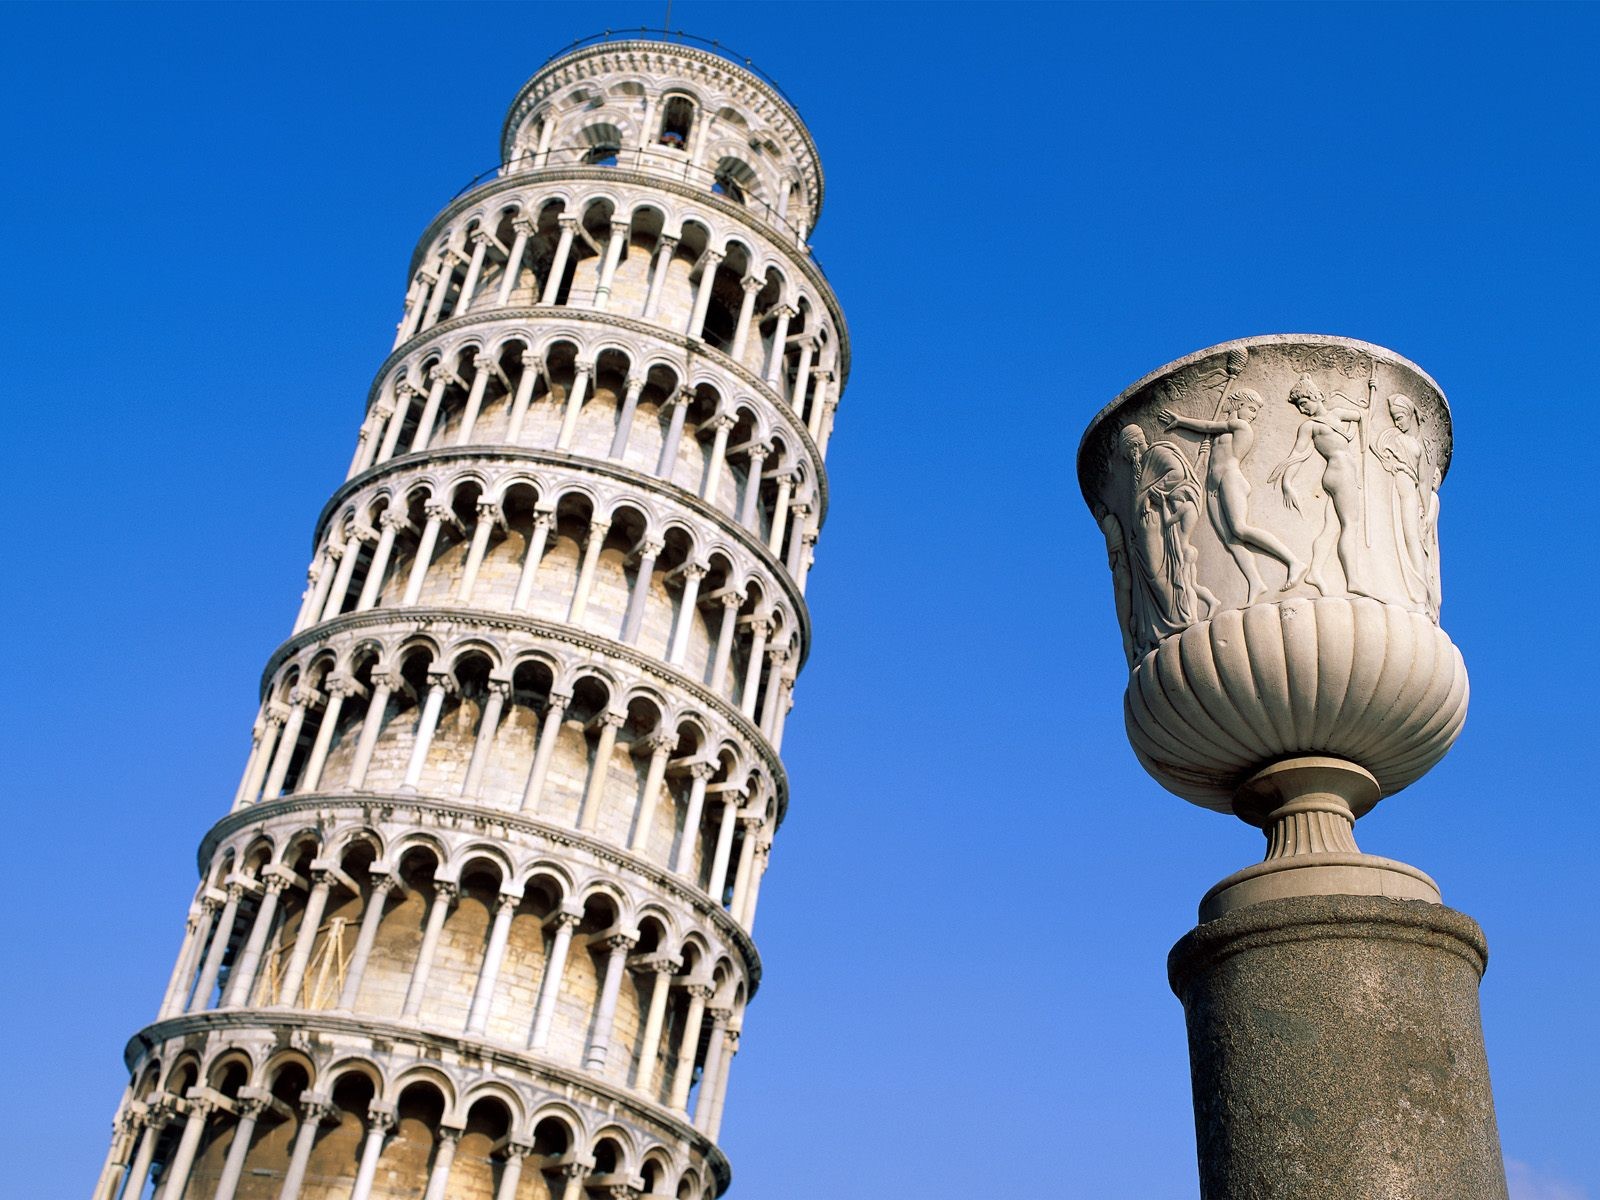 Italy Architecture Tower Leaning Tower Of Pisa 1600x1200